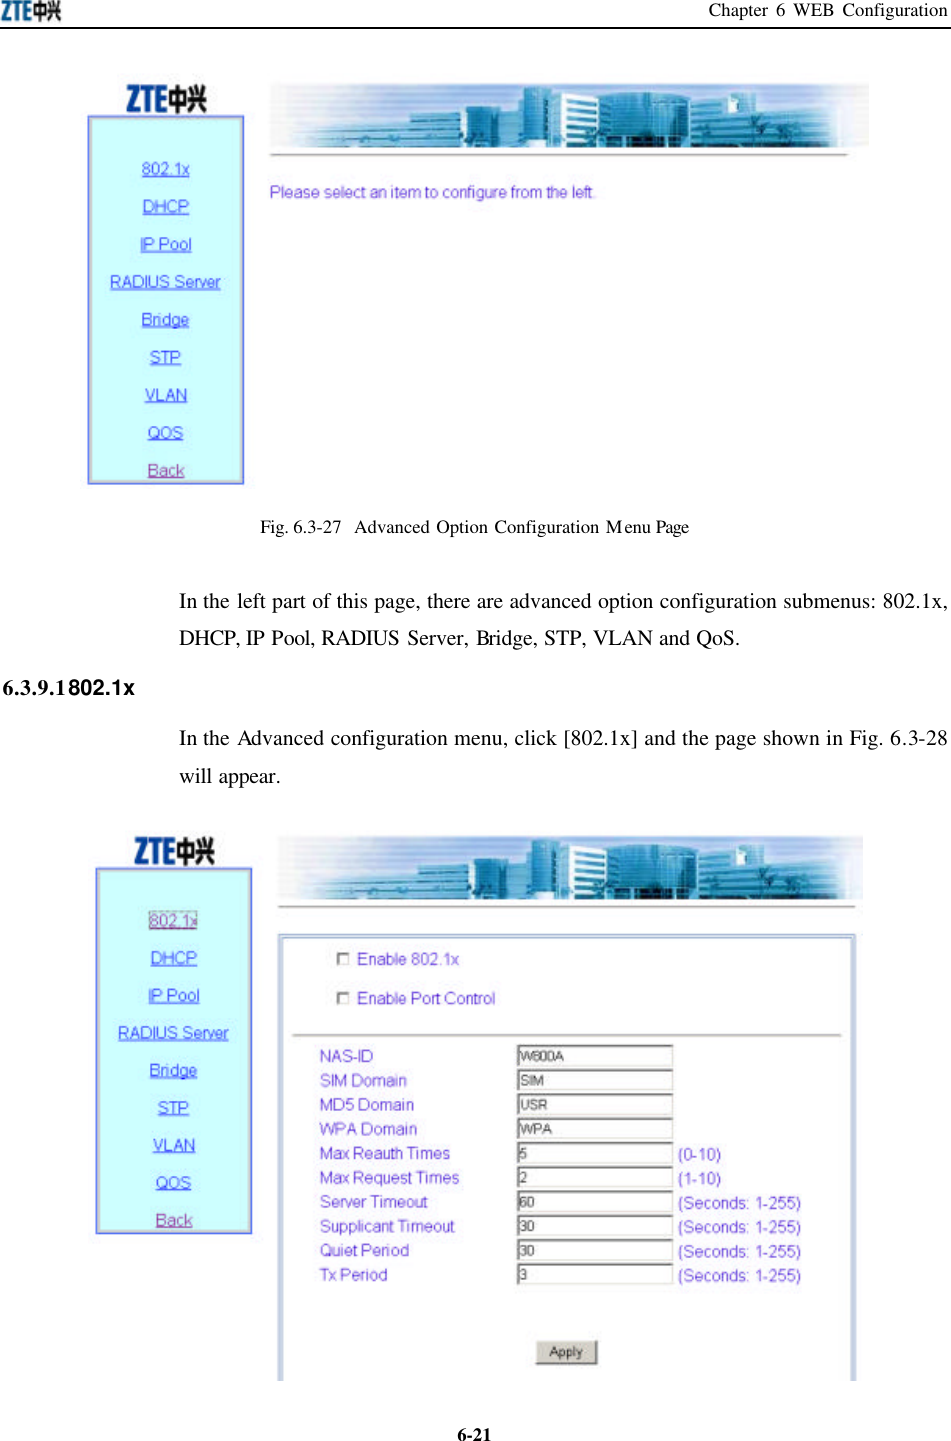 Chapter 6 WEB Configuration  6-21 Fig. 6.3-27  Advanced Option Configuration Menu Page In the left part of this page, there are advanced option configuration submenus: 802.1x, DHCP, IP Pool, RADIUS Server, Bridge, STP, VLAN and QoS.   6.3.9.1 802.1x   In the Advanced configuration menu, click [802.1x] and the page shown in Fig. 6.3-28 will appear.    